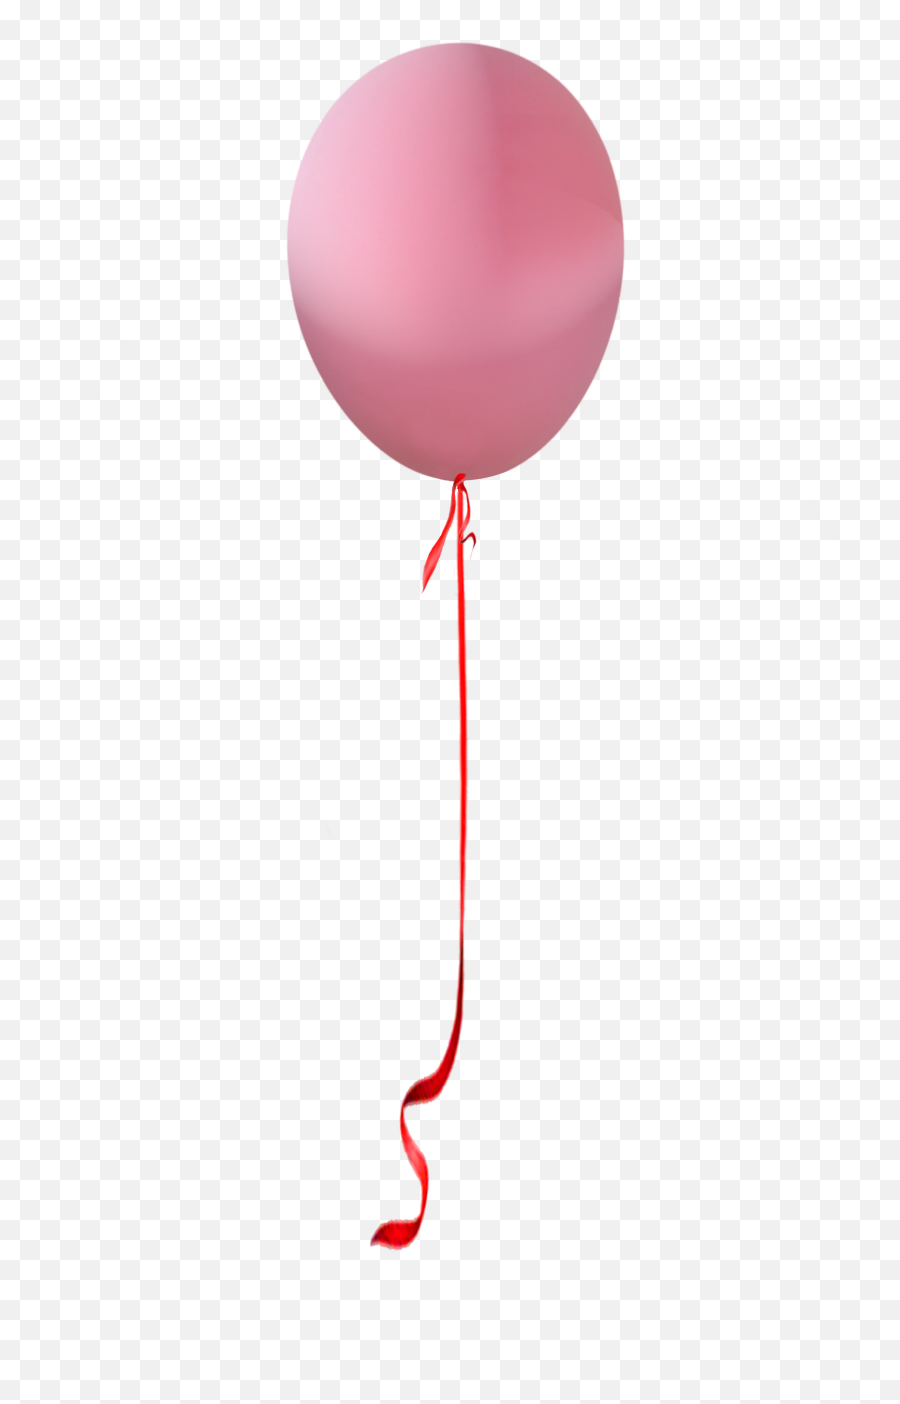 Download Free Png Hd Balloon String - Balloon,String Png